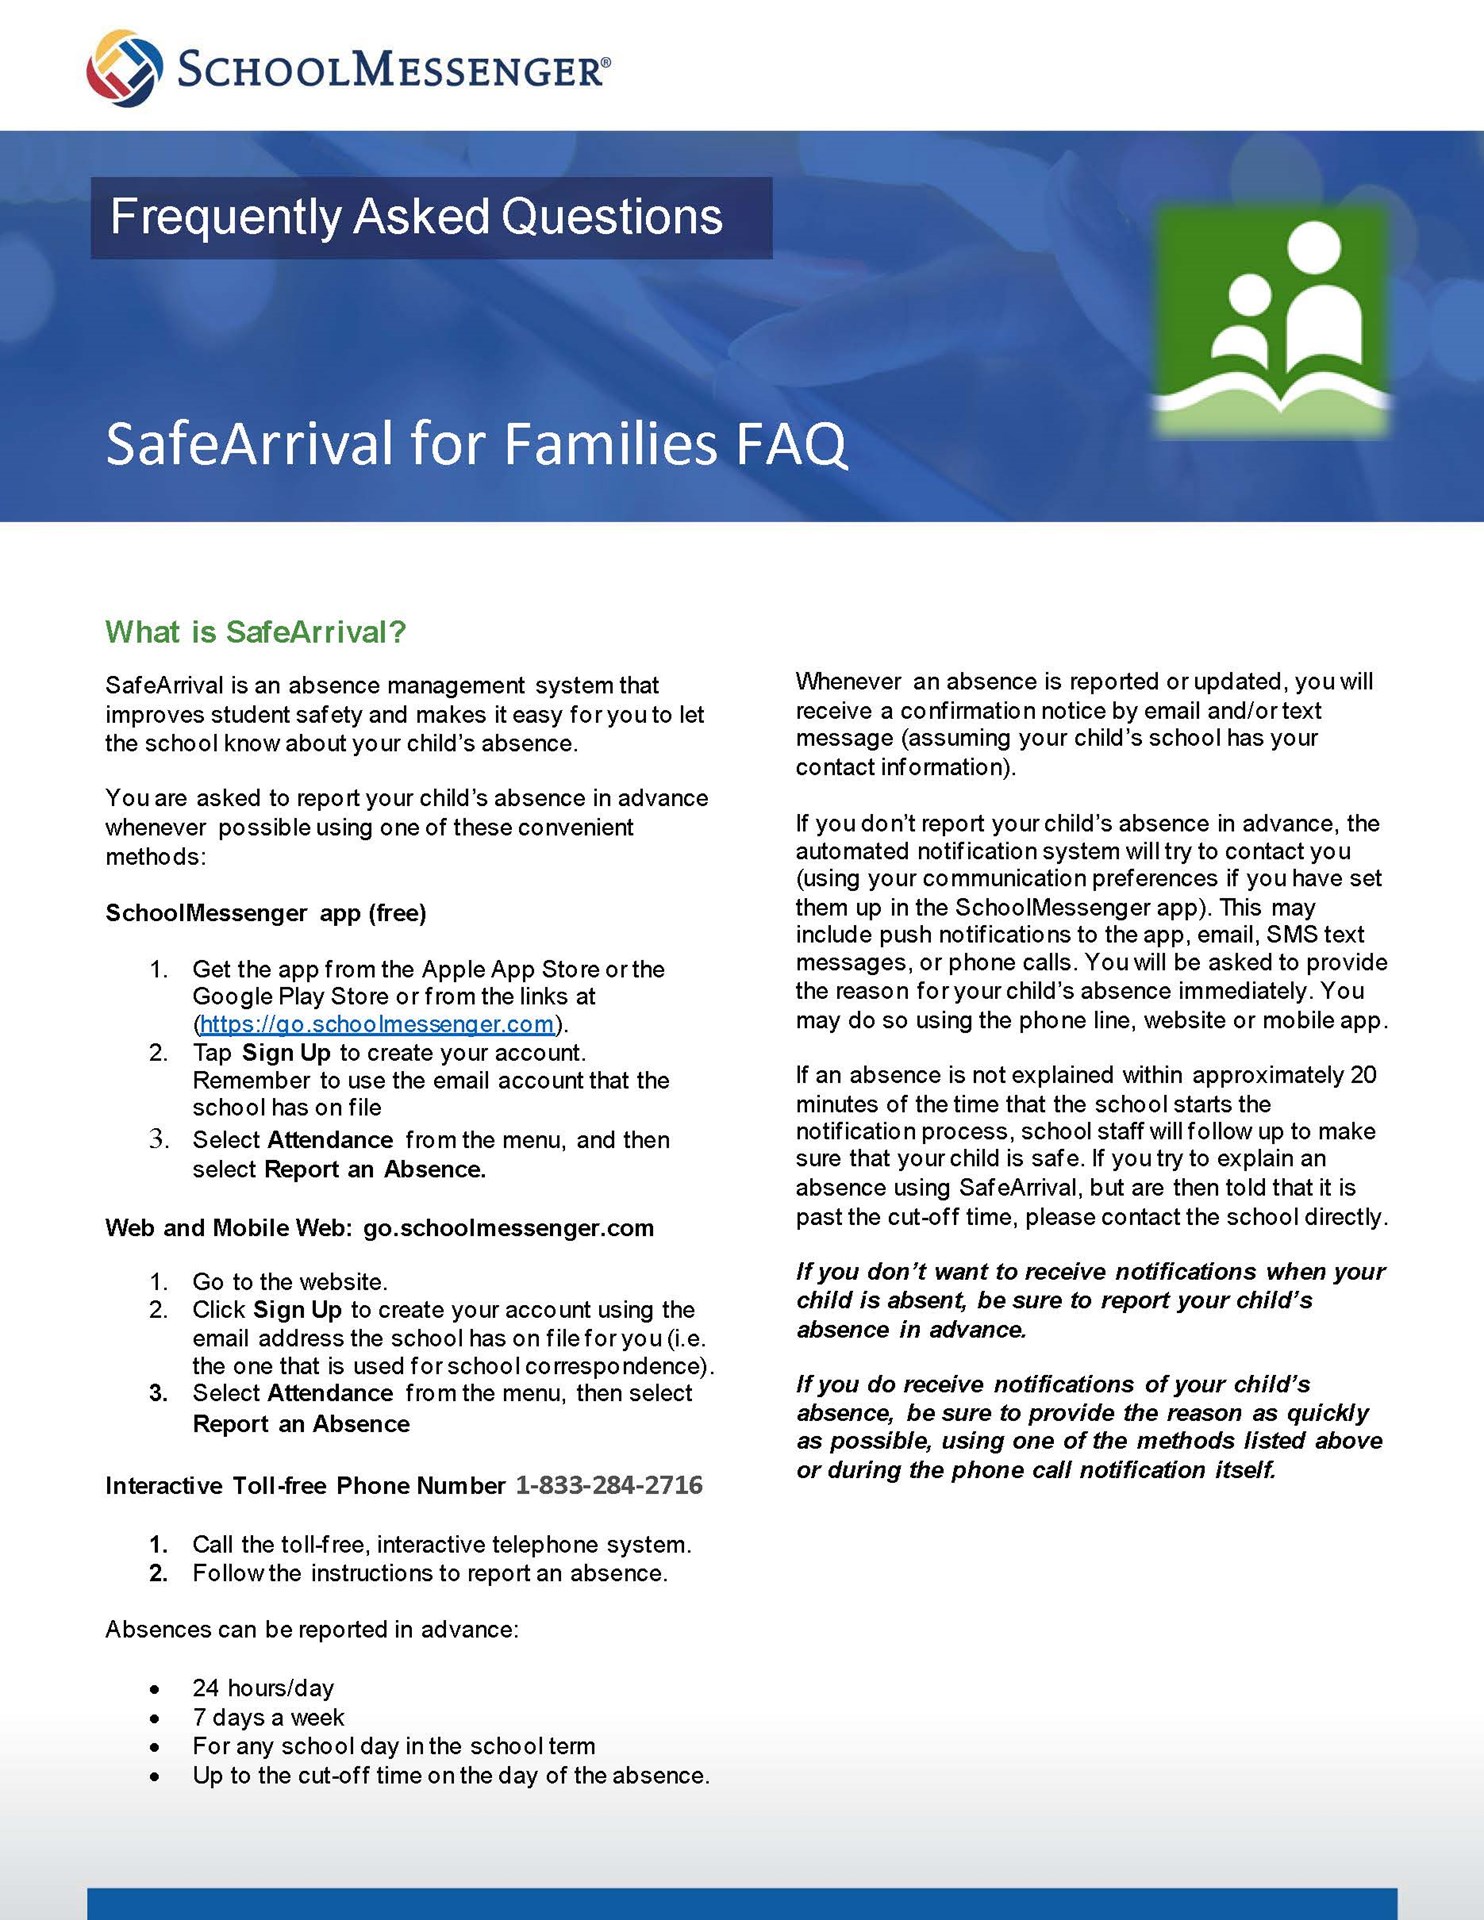 SafeArrival Family FAQ - SD5_Page_1.jpg